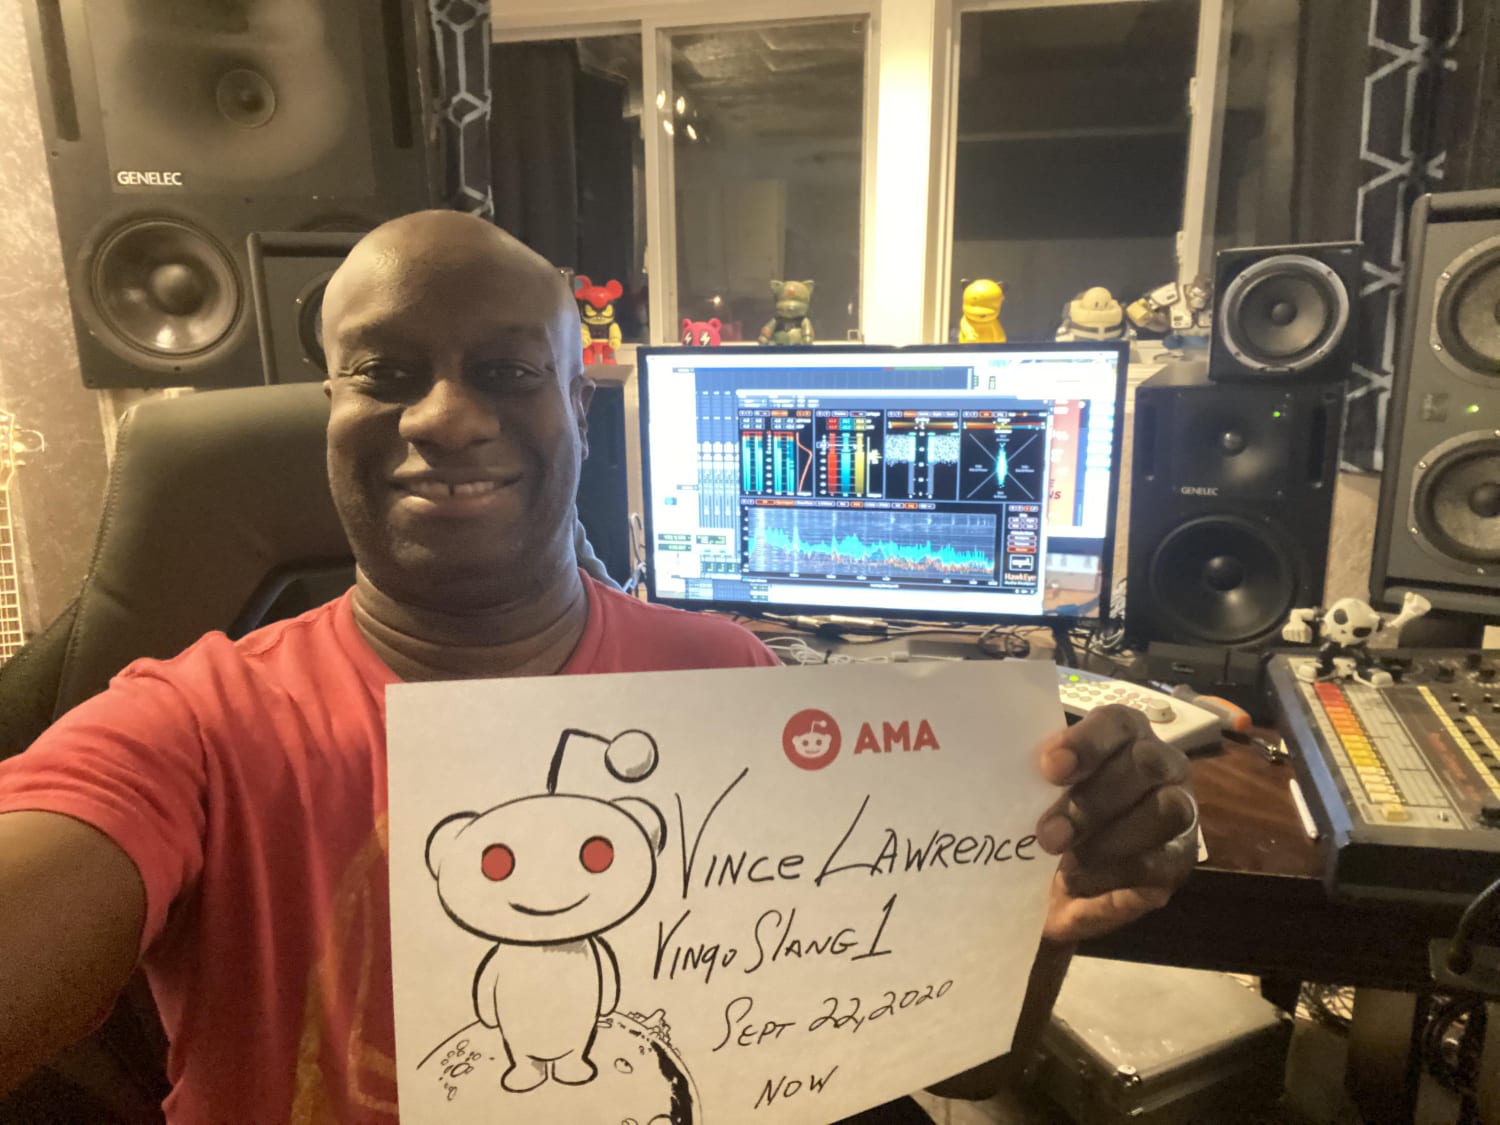 I’m Vince Lawrence and I know quite a bit about House Music. AMA